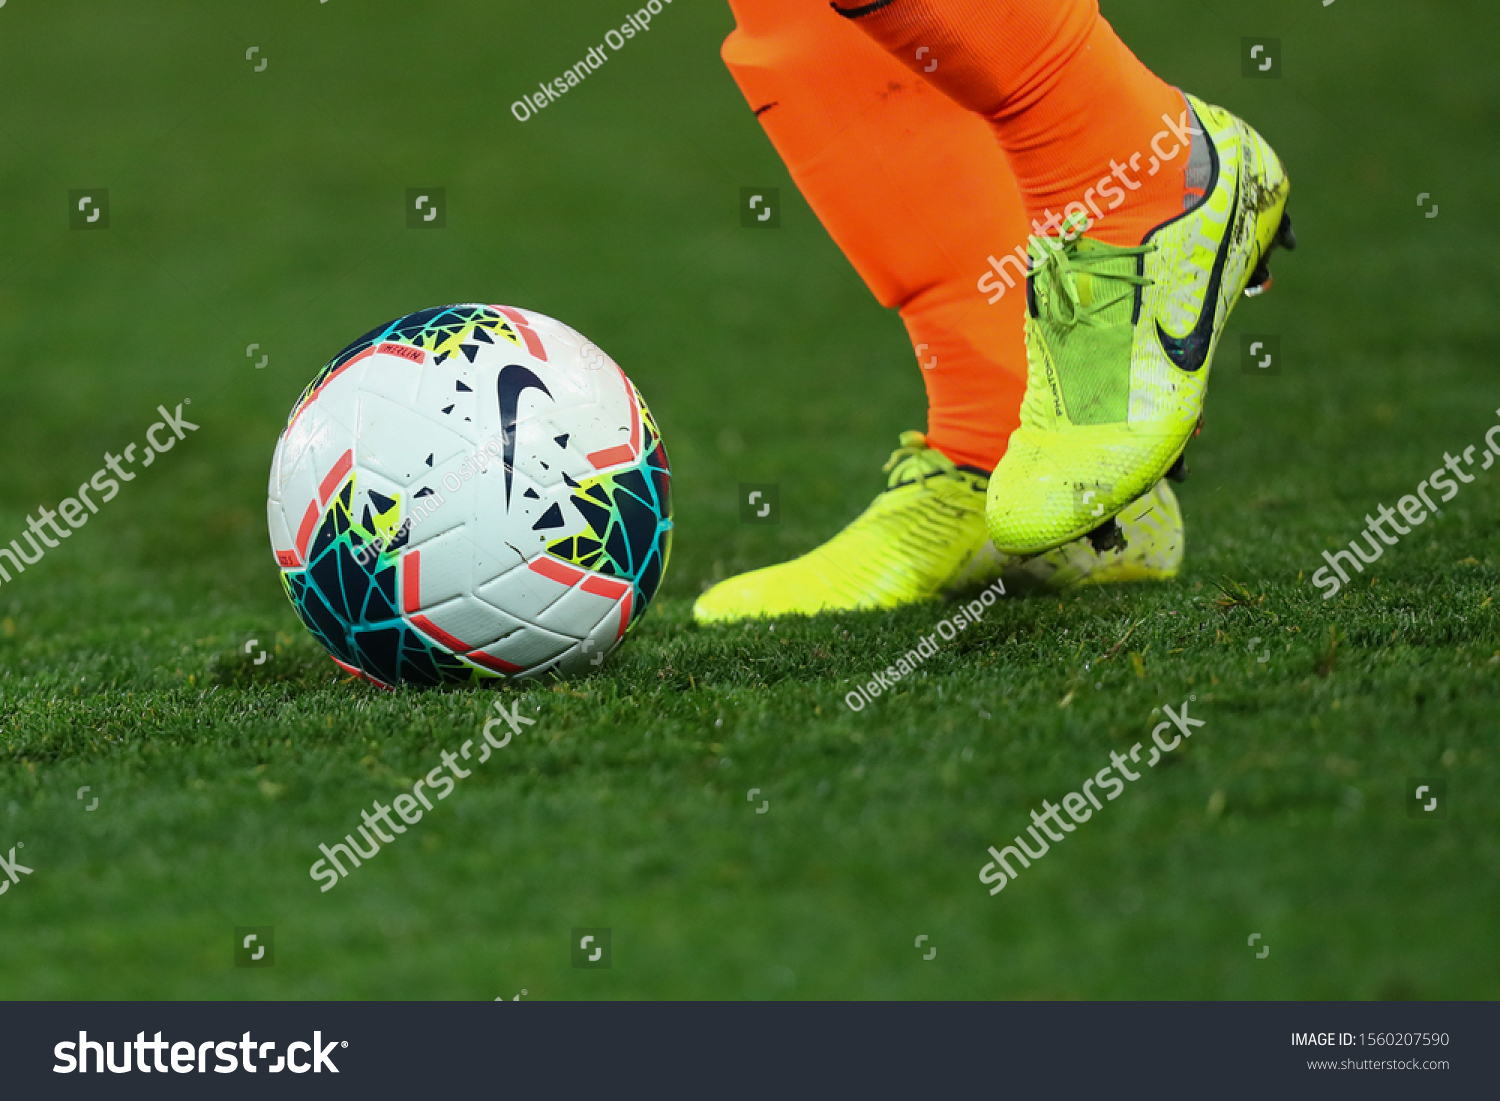 NOVEMBER 10 - KHARKIV, UKRAINE: Nike Merlin 2020 FIFA SOCCER BALL on a grass. Nike football boots. Close-up detailed view. Beautiful green pitch on the background. #1560207590